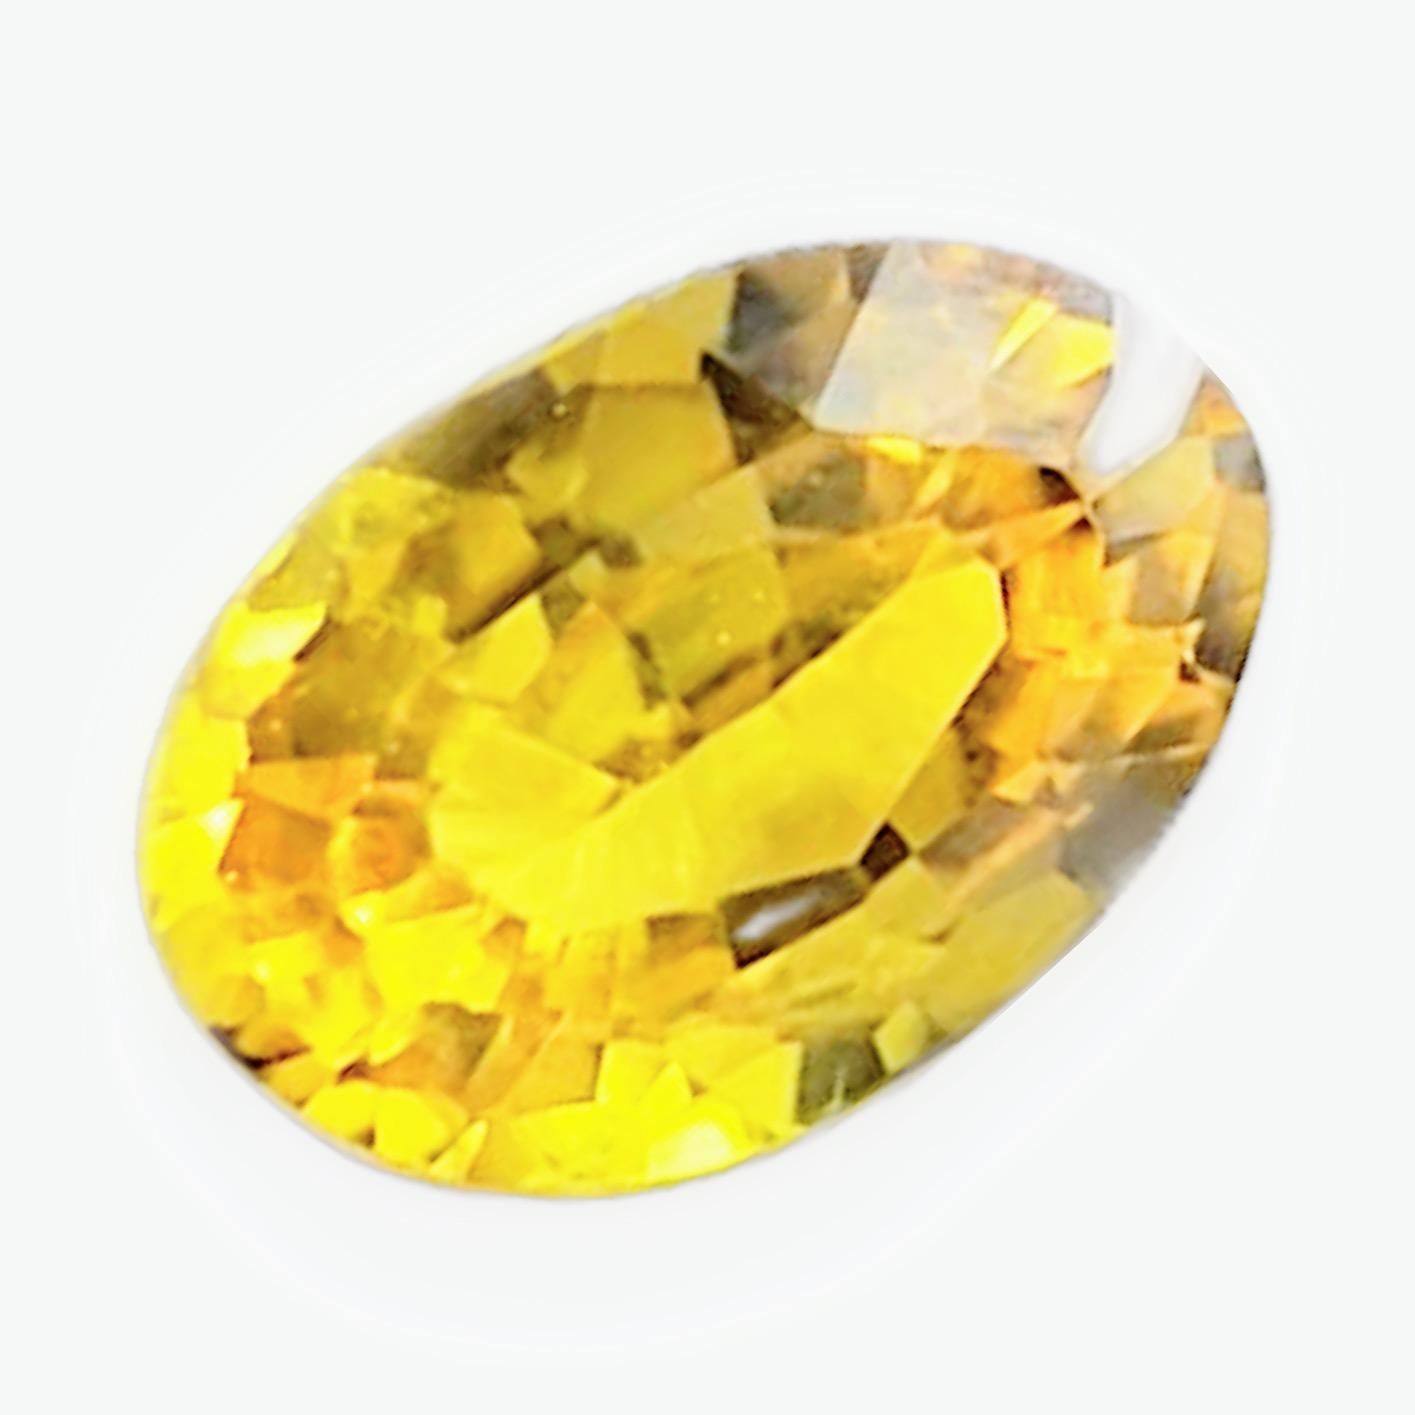 Brighten Your World with a Eye Clean 0.95ct Oval Cut Natural UNHEATED Yellow Sapphire Loose Gemstone. With its captivating yellow hue, this loose gemstone is a true treasure of nature, waiting to be transformed into a unique and dazzling piece of